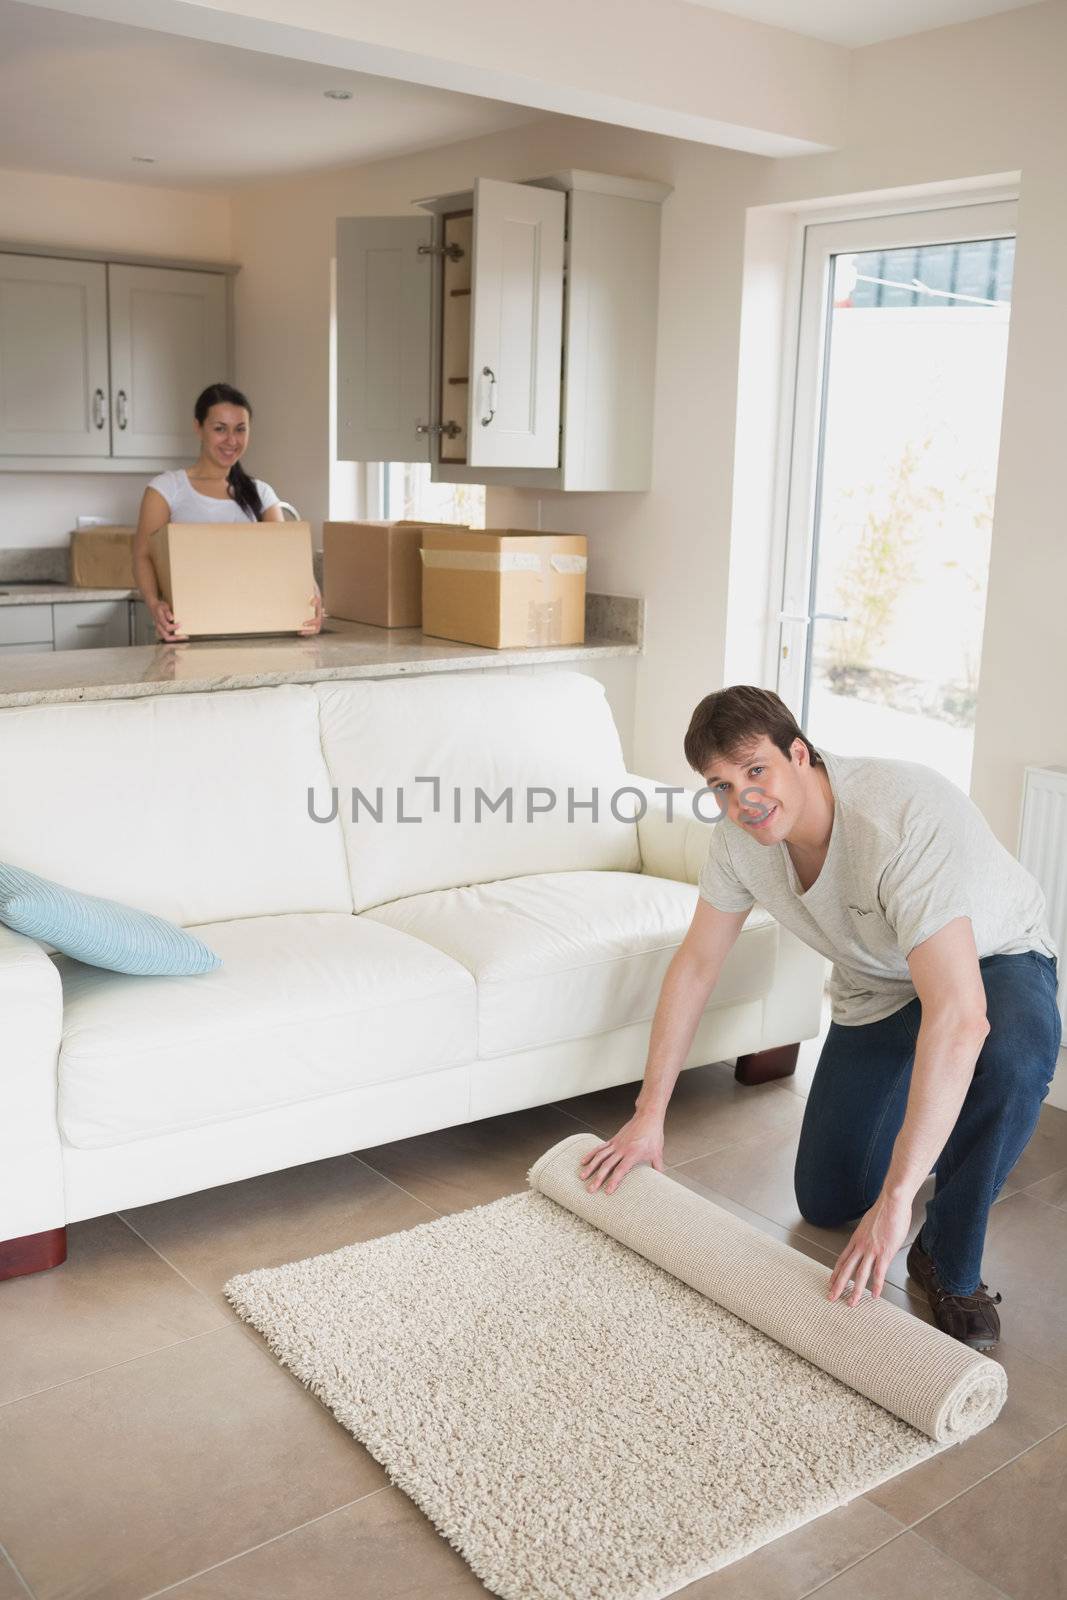 Young man and woman furnishing their kitchen and living room for a relocation